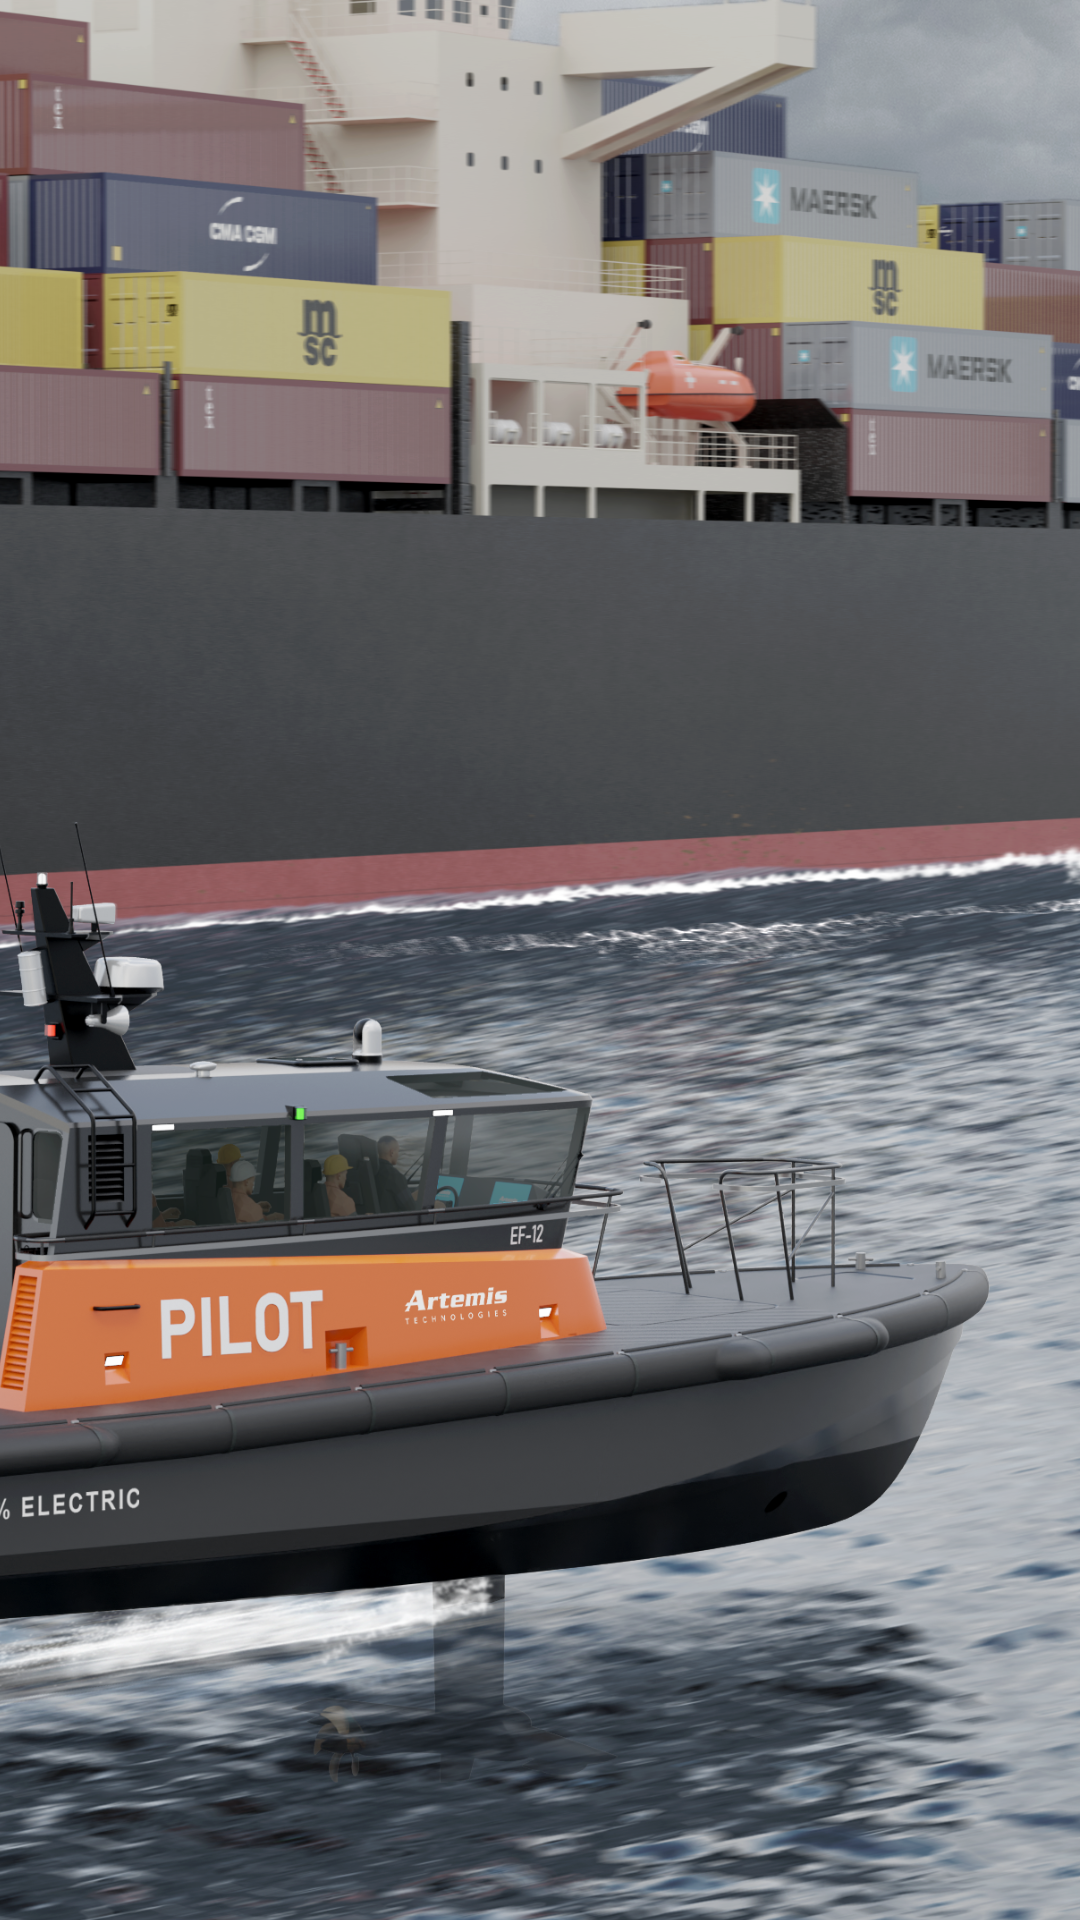 Orange foiling pilot boat with cargo ship in background